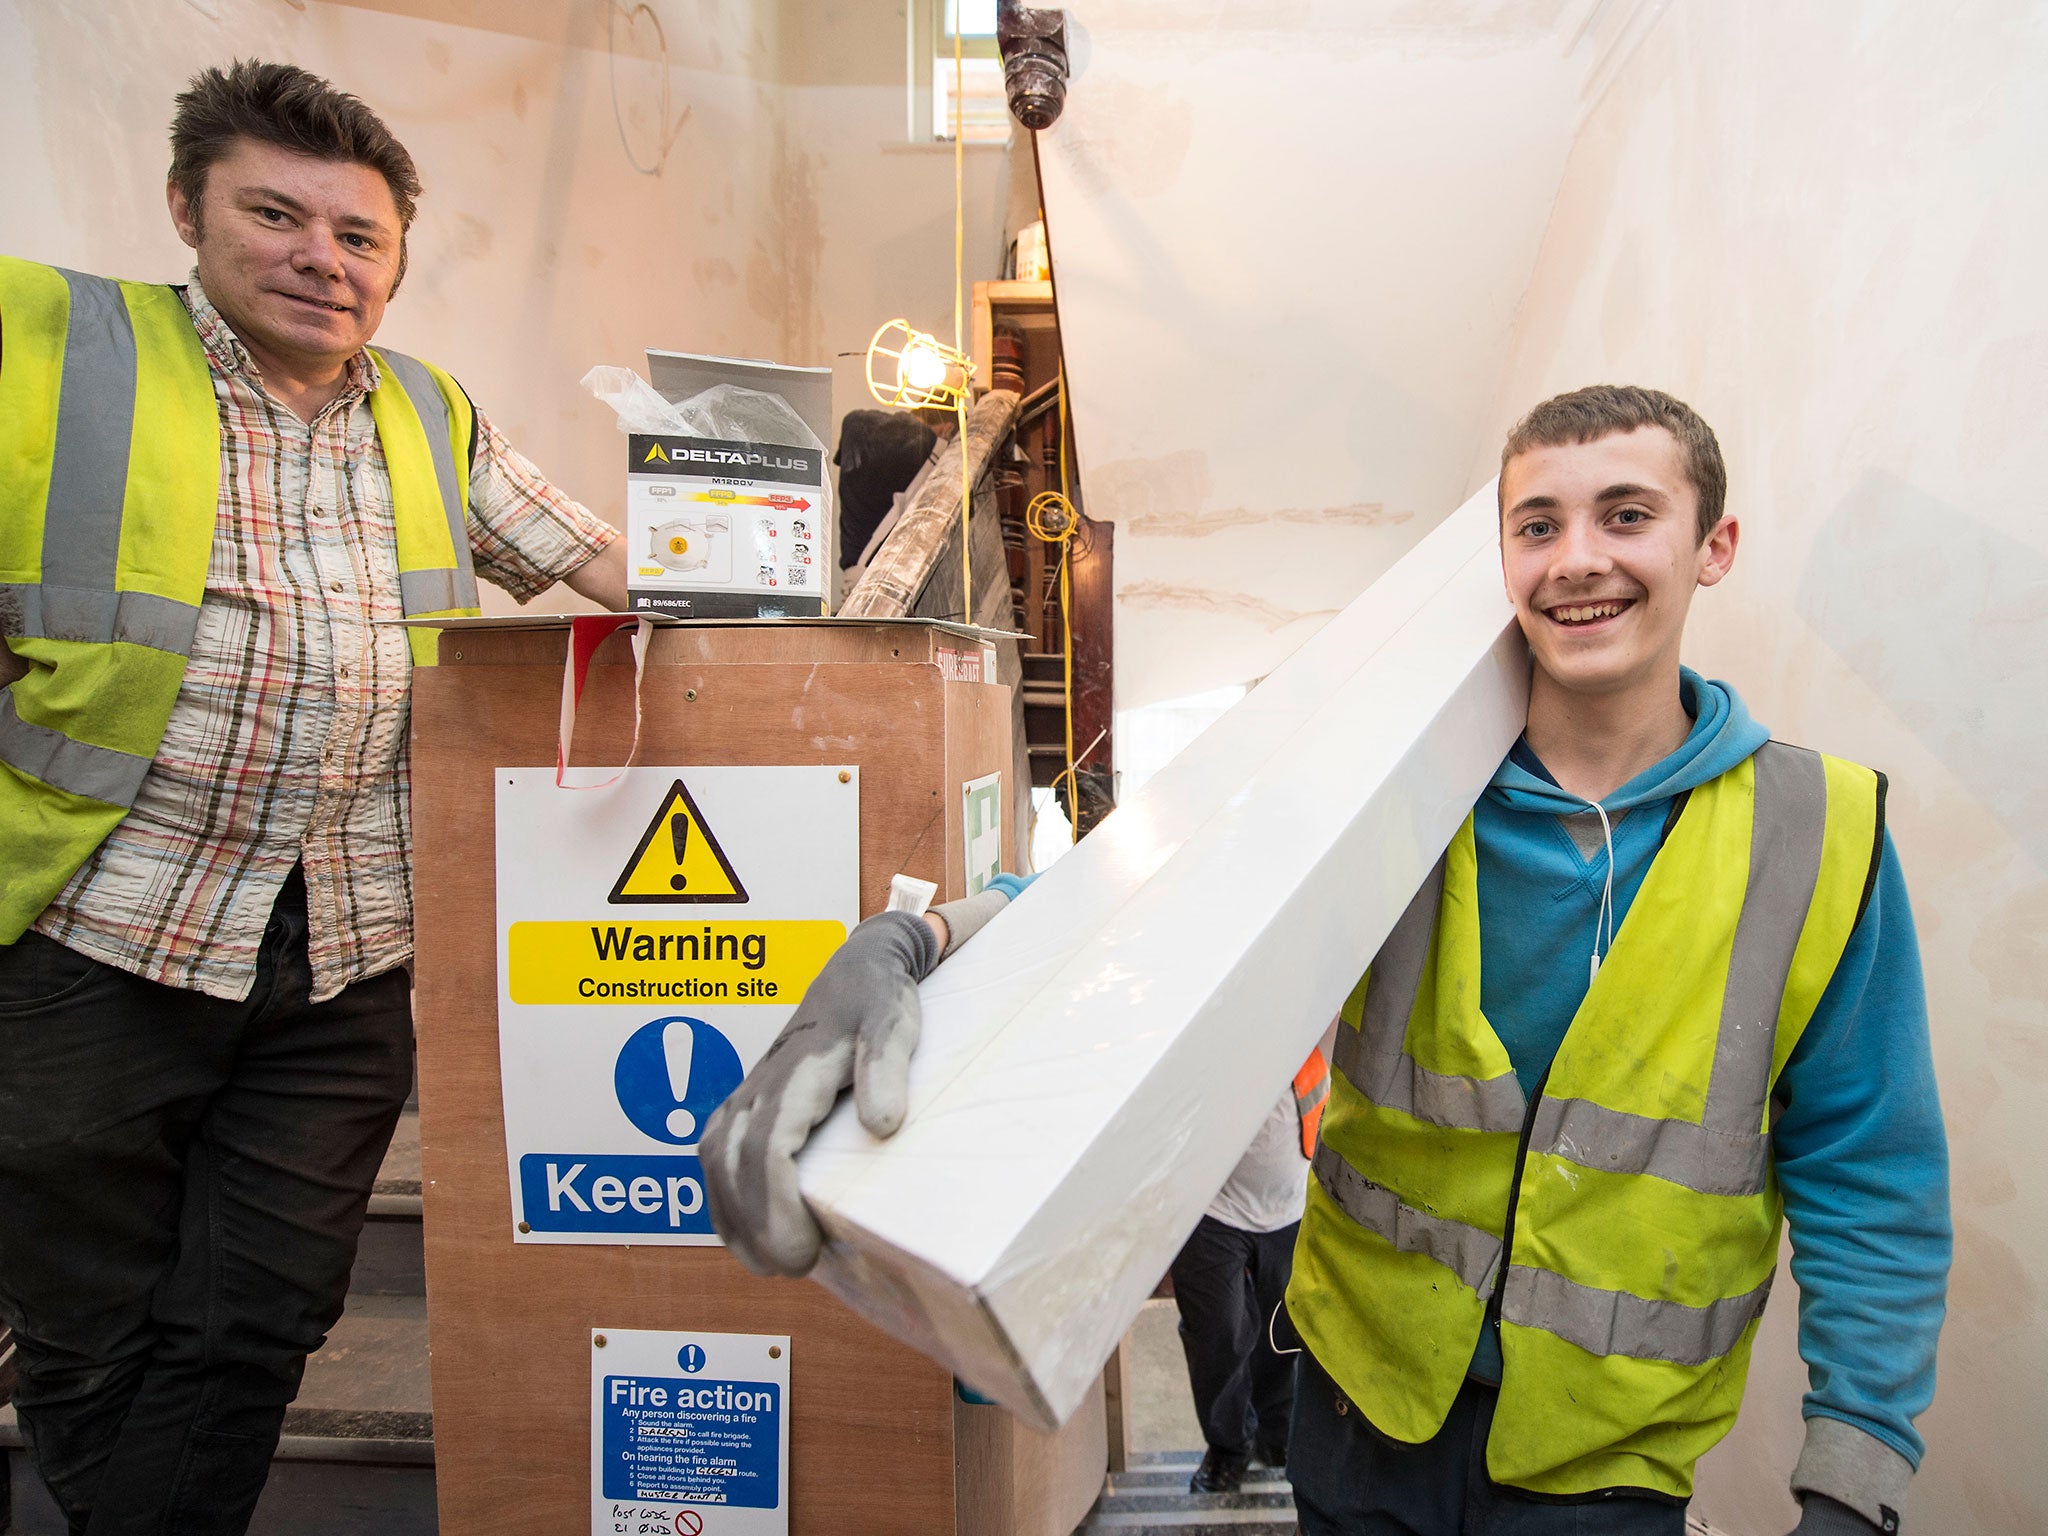 As a result of fundraising by the Evening Standard for the Homeless Veterans campaign, renovation work is underway to provide temporary homes for veterans